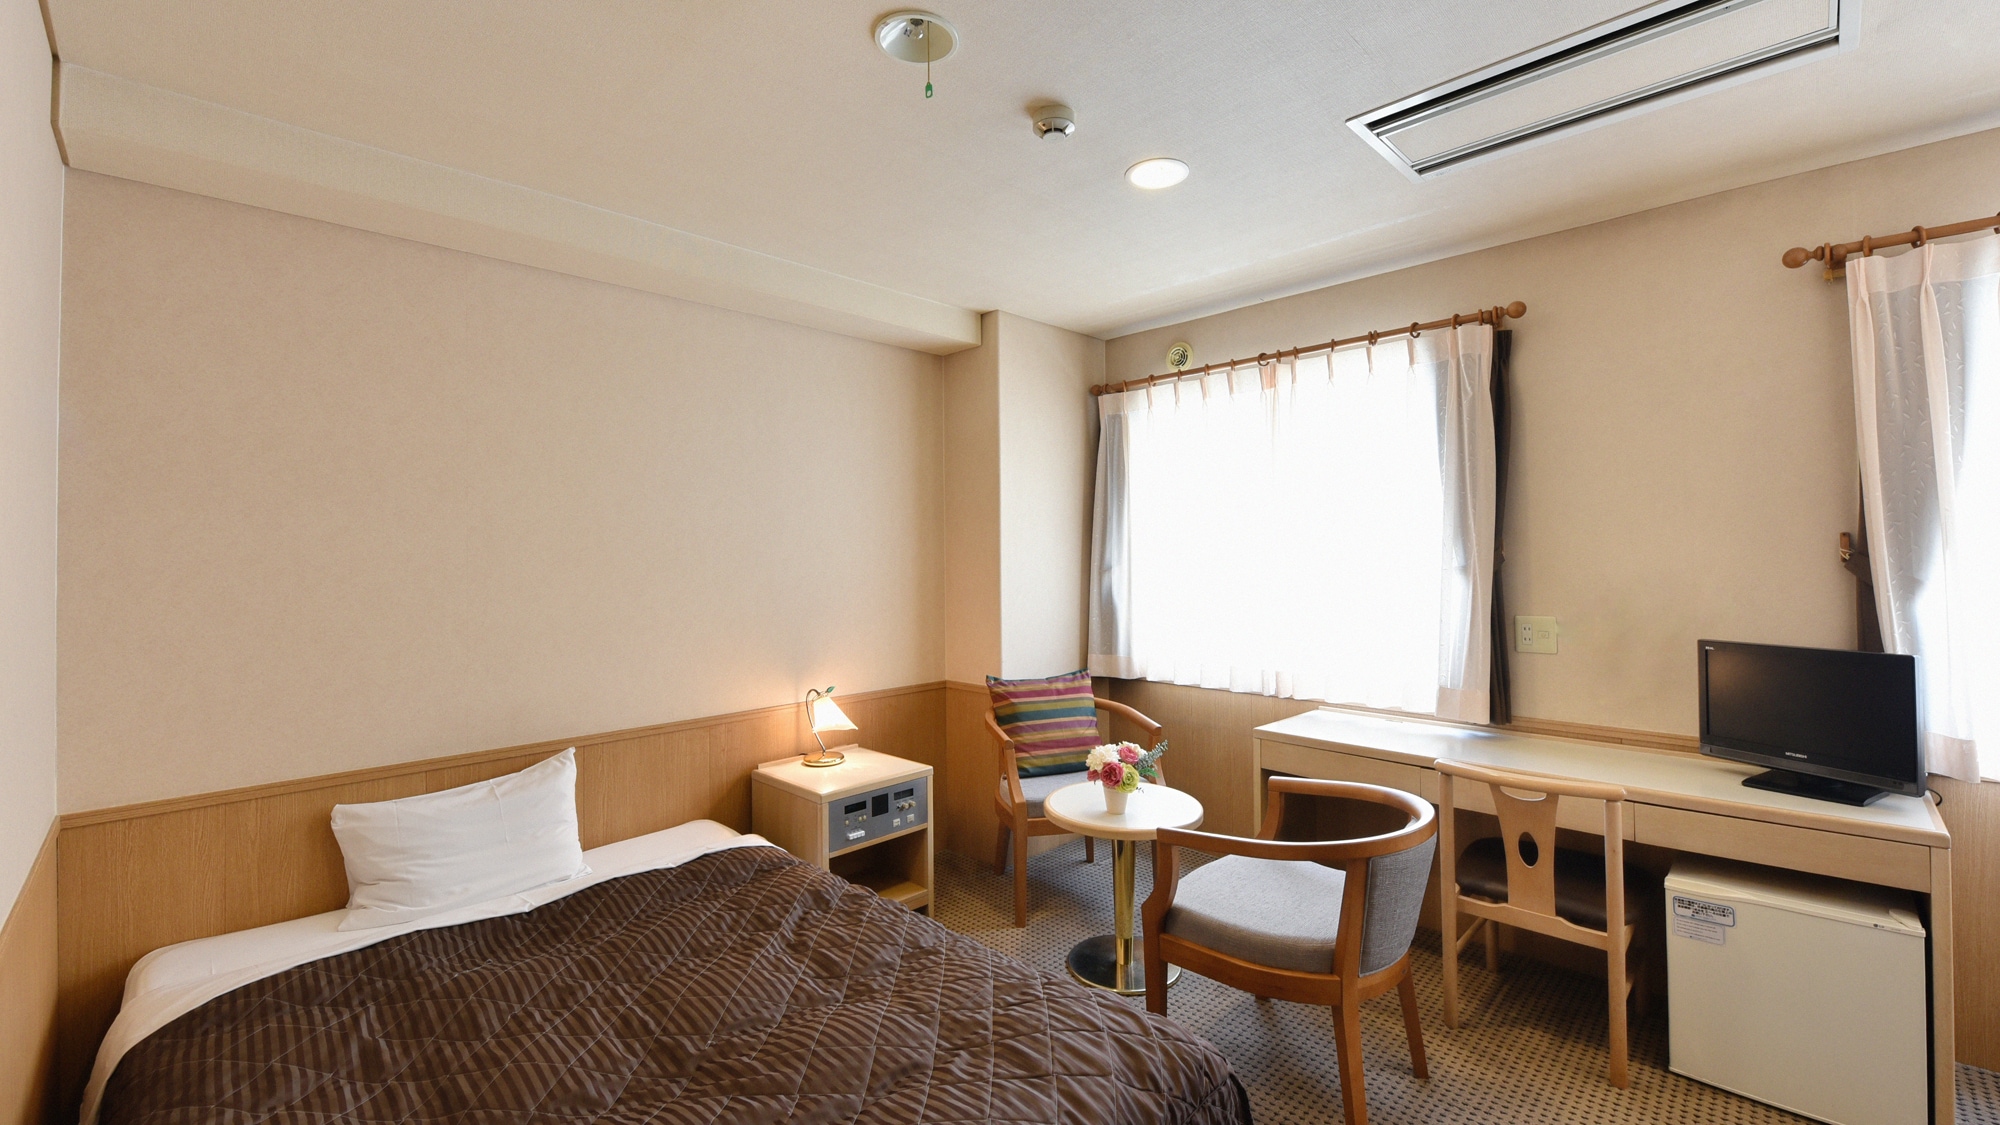 ◆ Double room 19 square meters